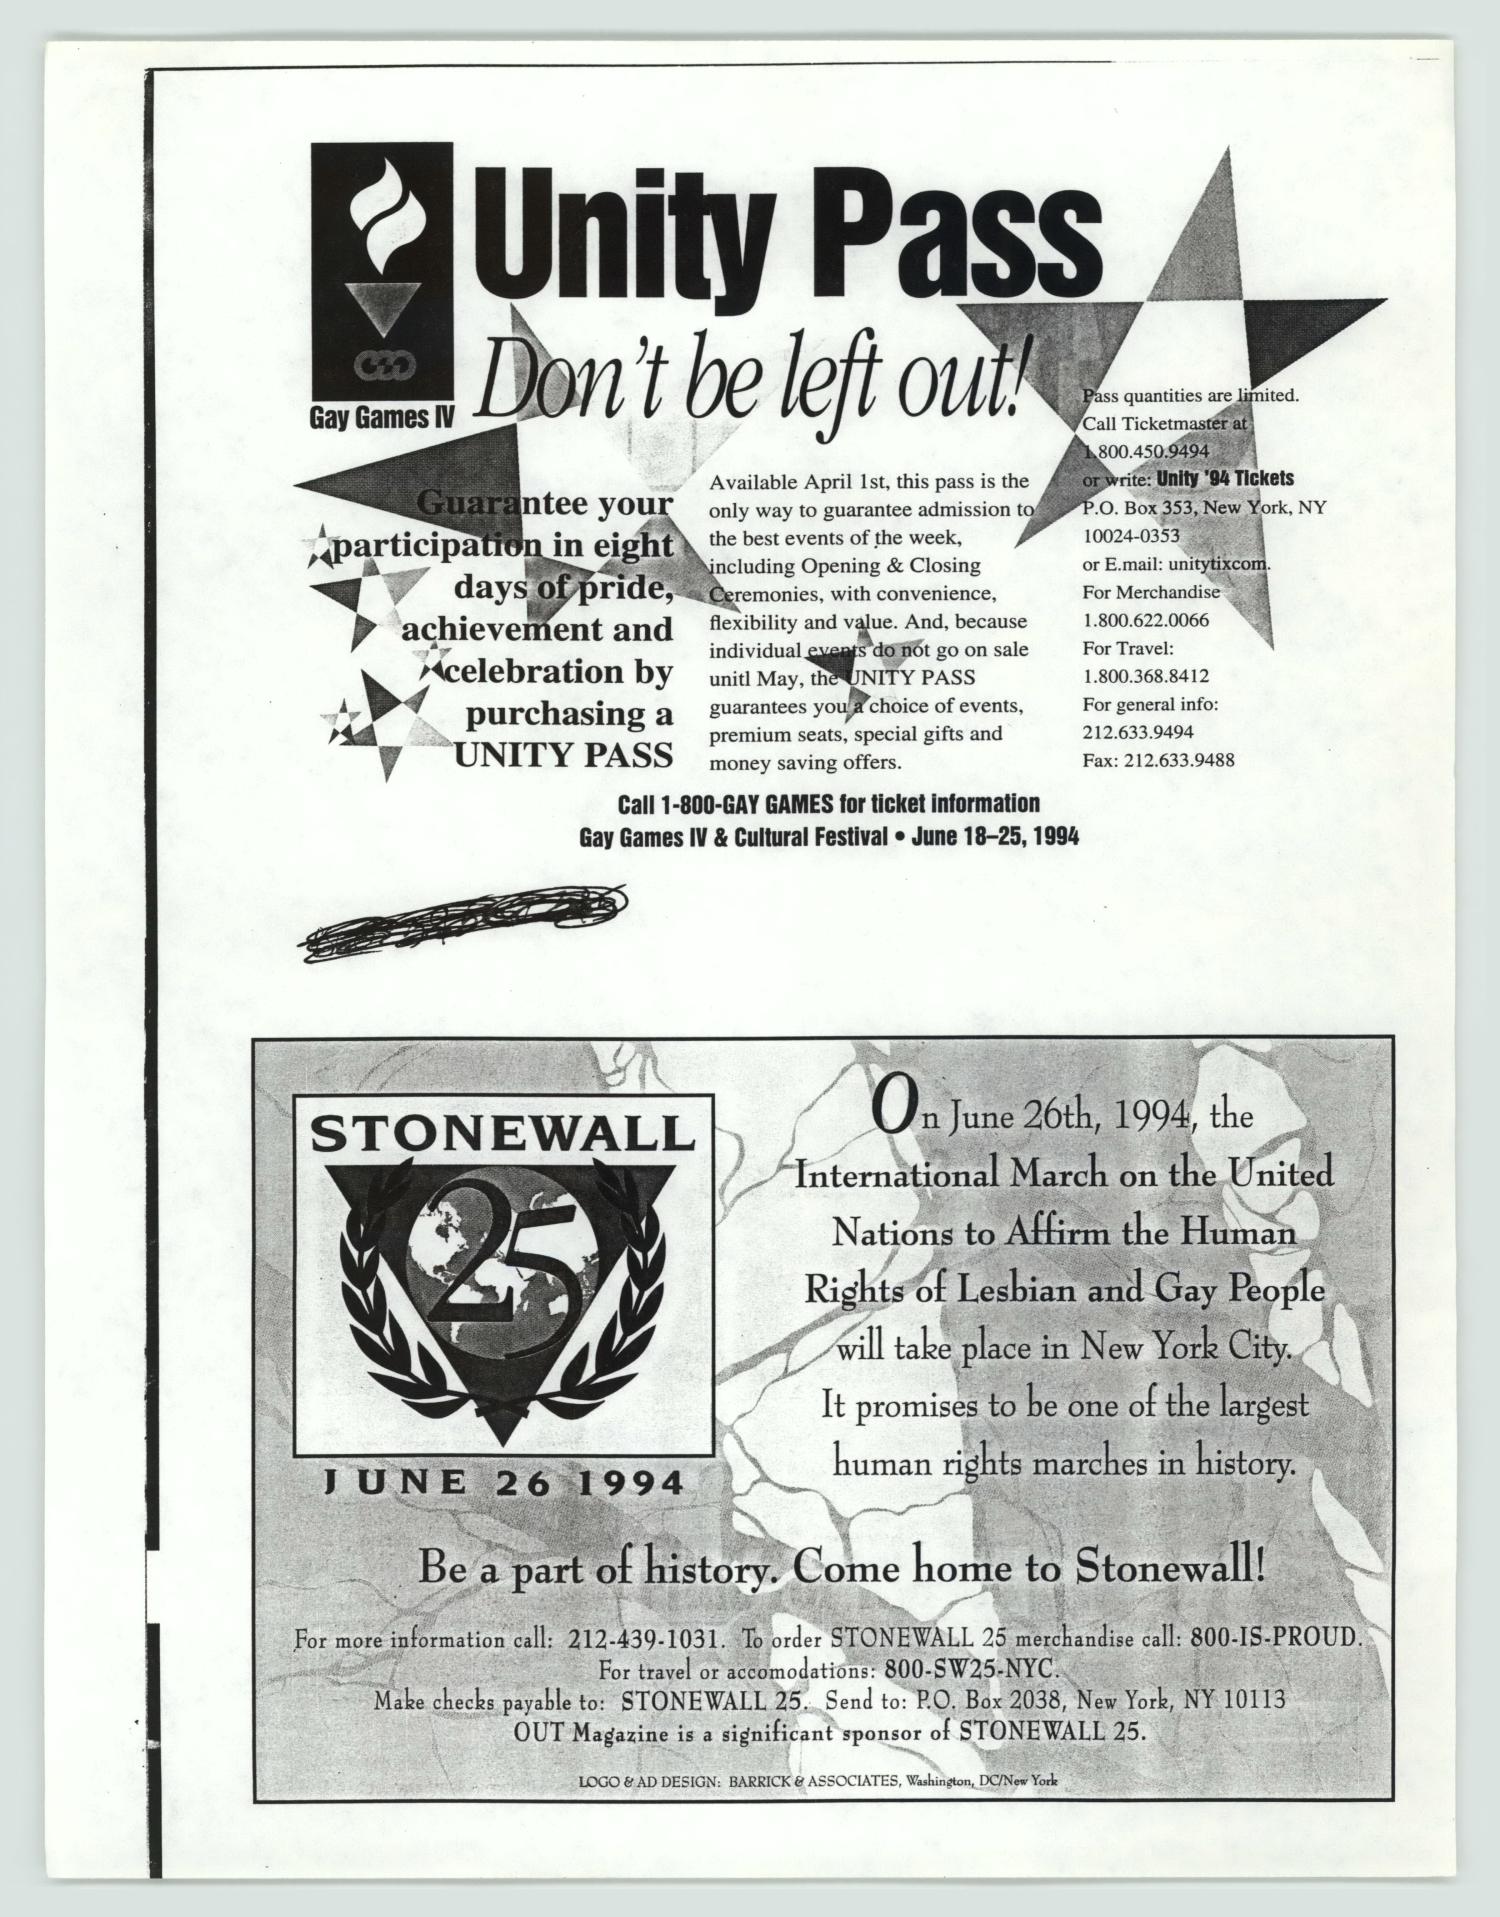 [Newsletter: Unity Pass and Stonewall 25]
                                                
                                                    [Sequence #]: 1 of 2
                                                